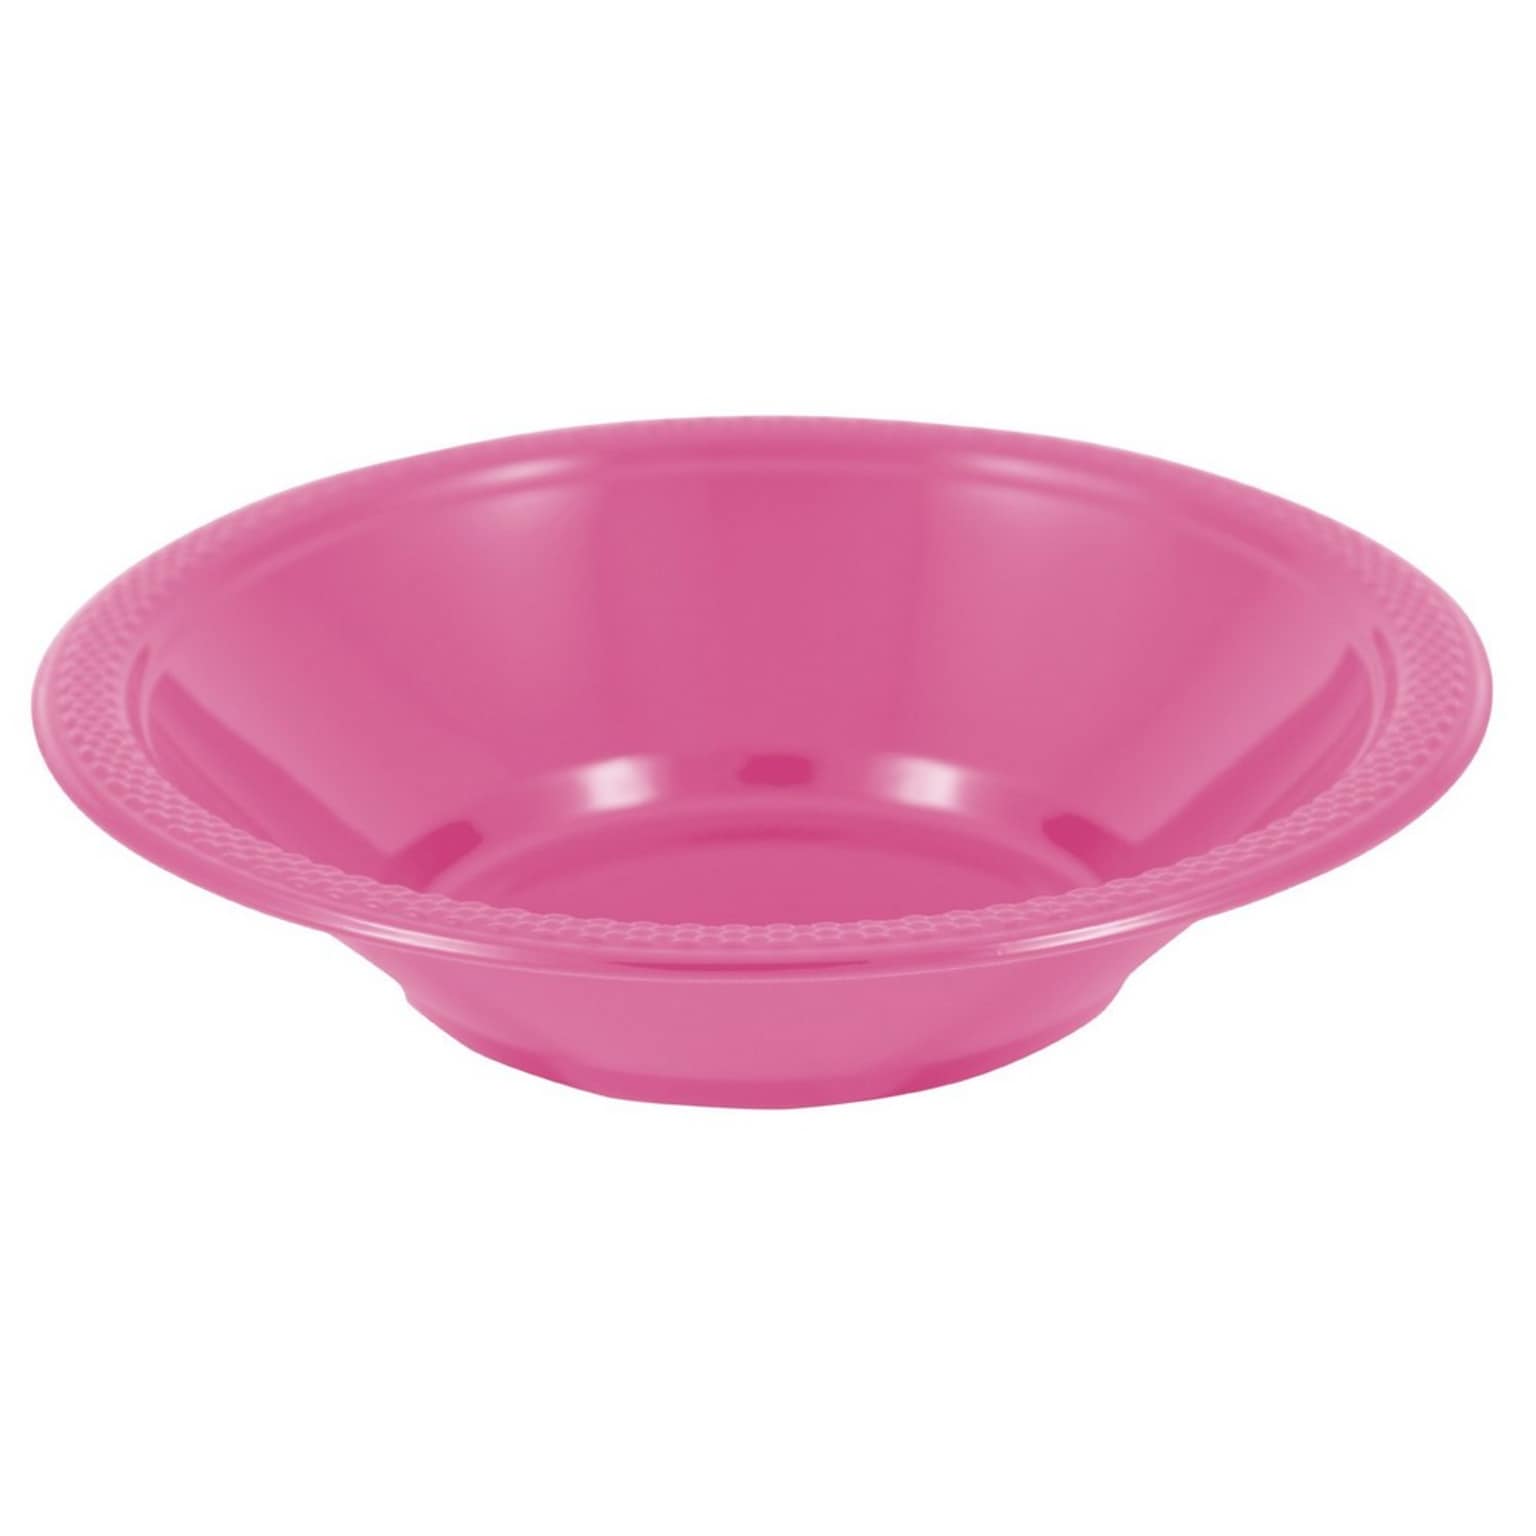 JAM PAPER Disposable Plastic Bowls, Small, 12 oz (7 Inch Diameter), Fuchsia Pink, 20/pack